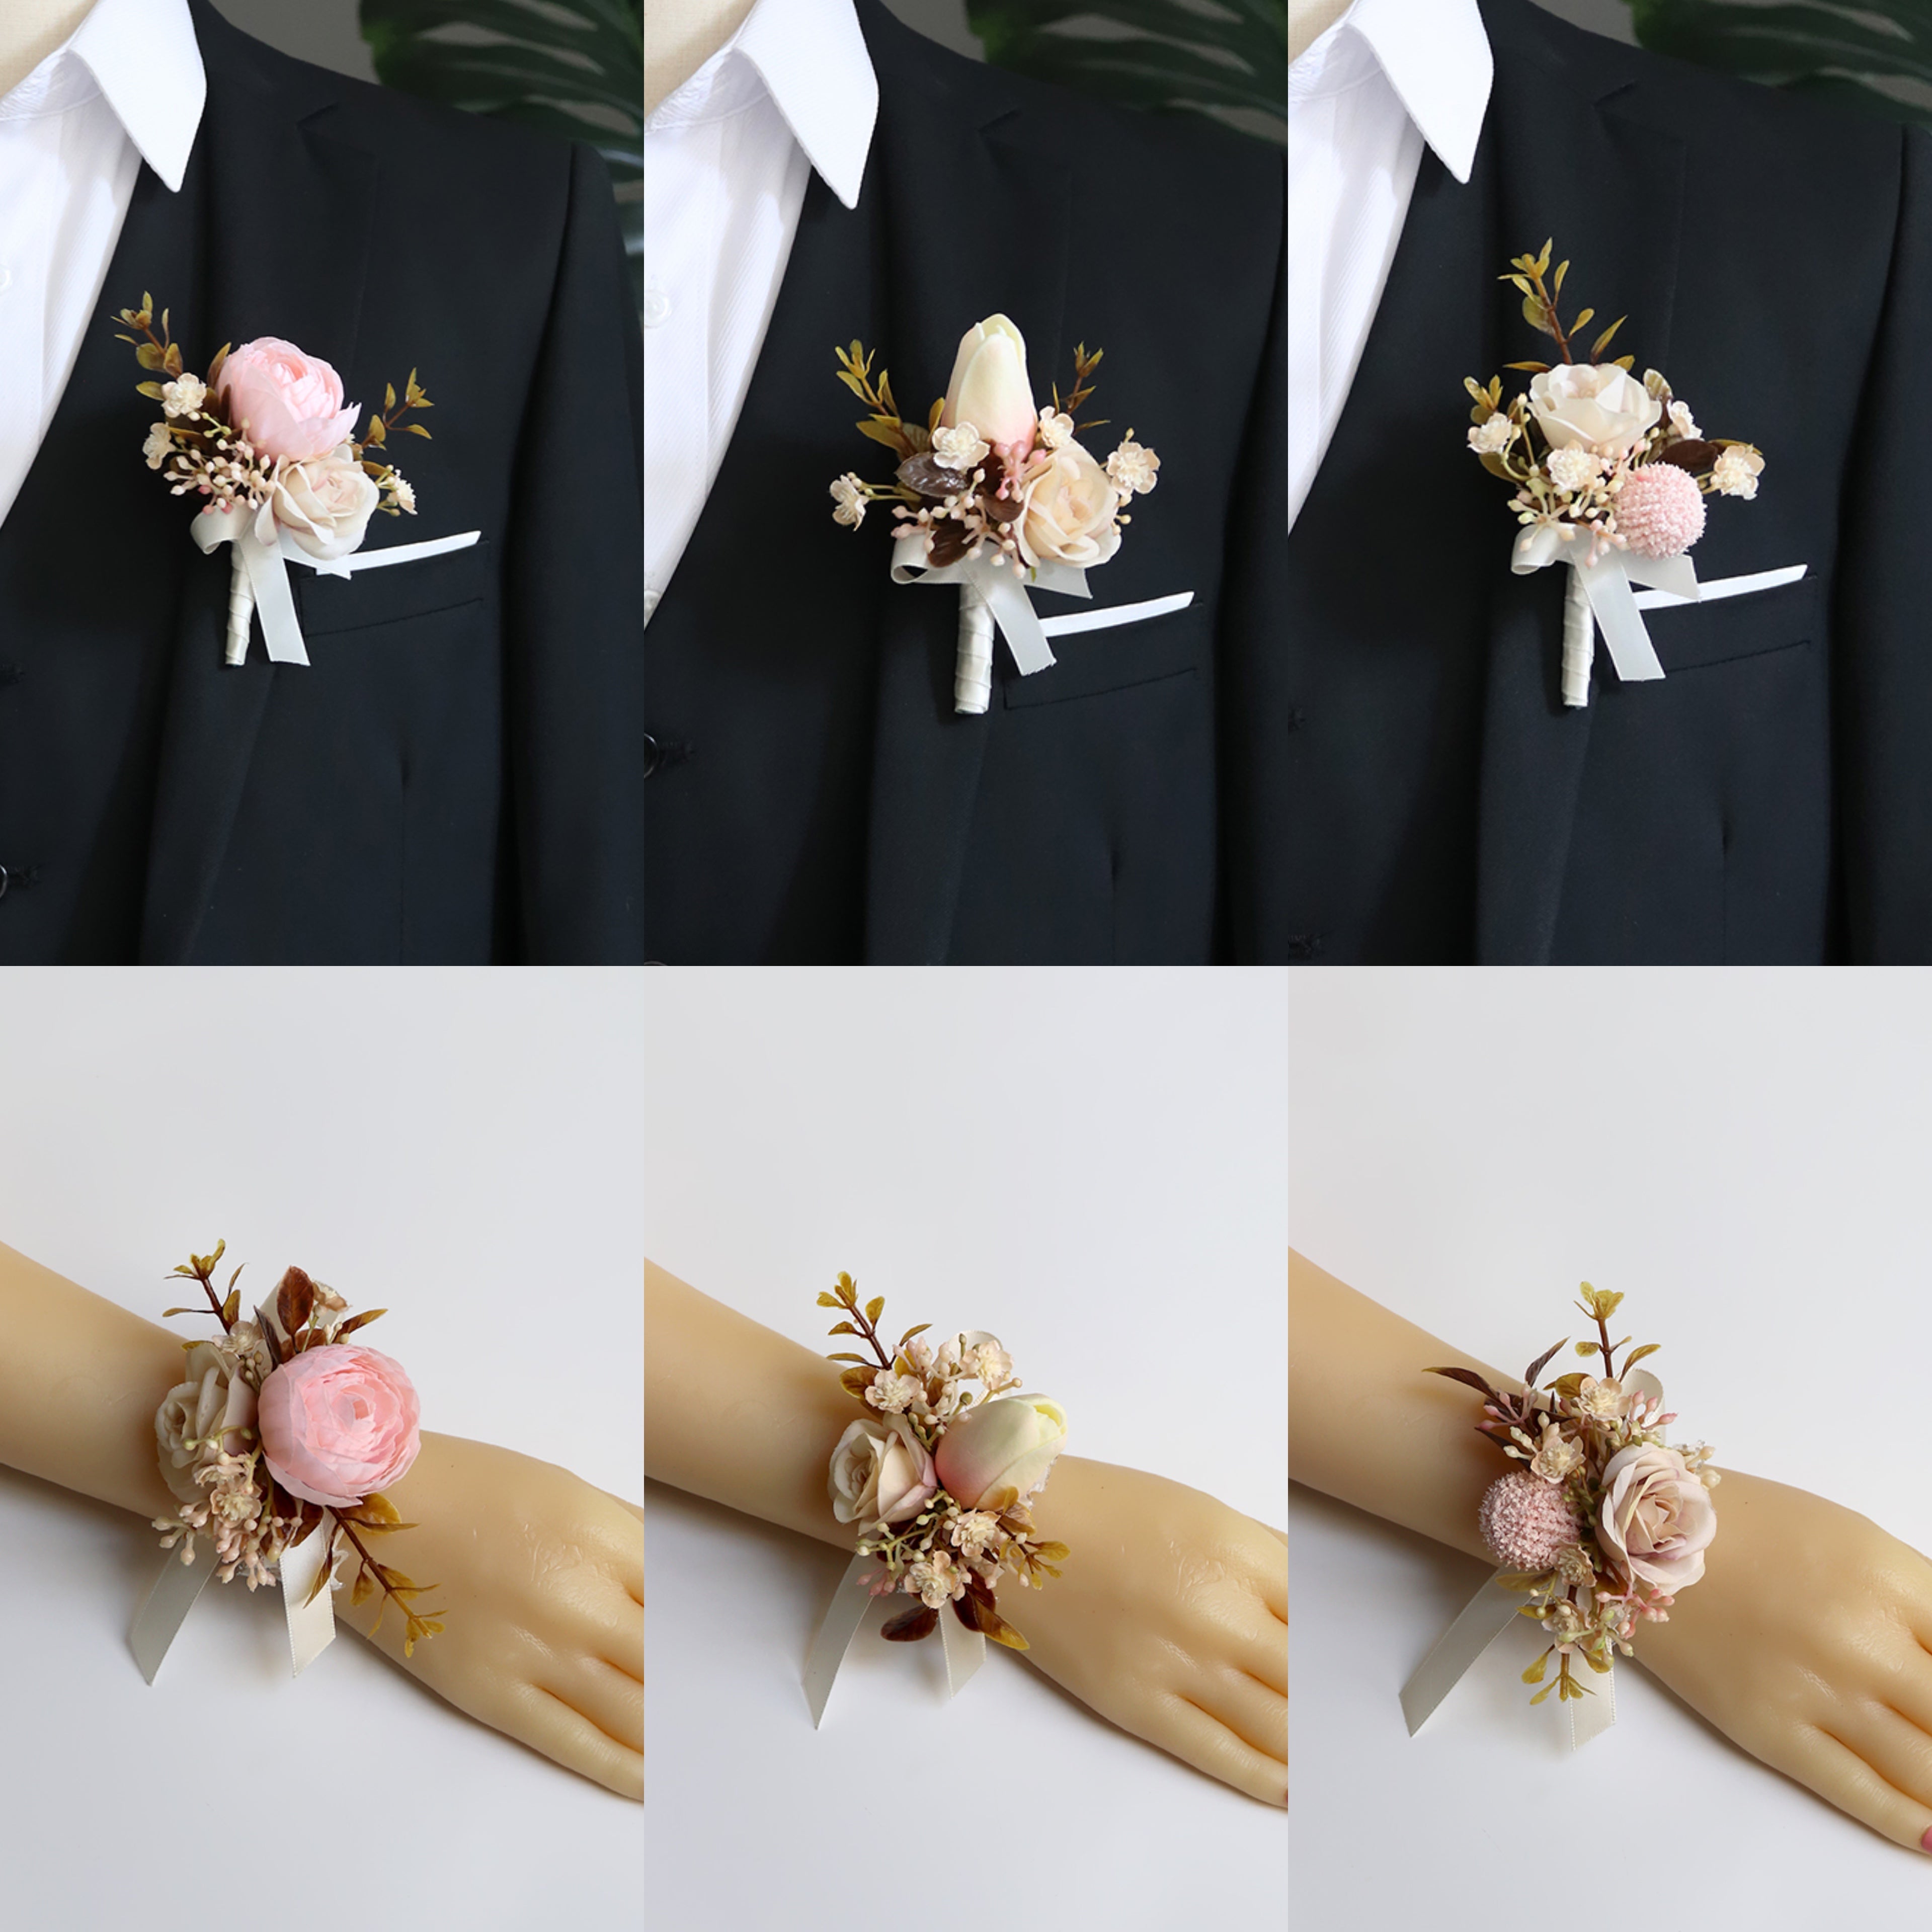 Classic Powder Wrist Corsages - 6 styles